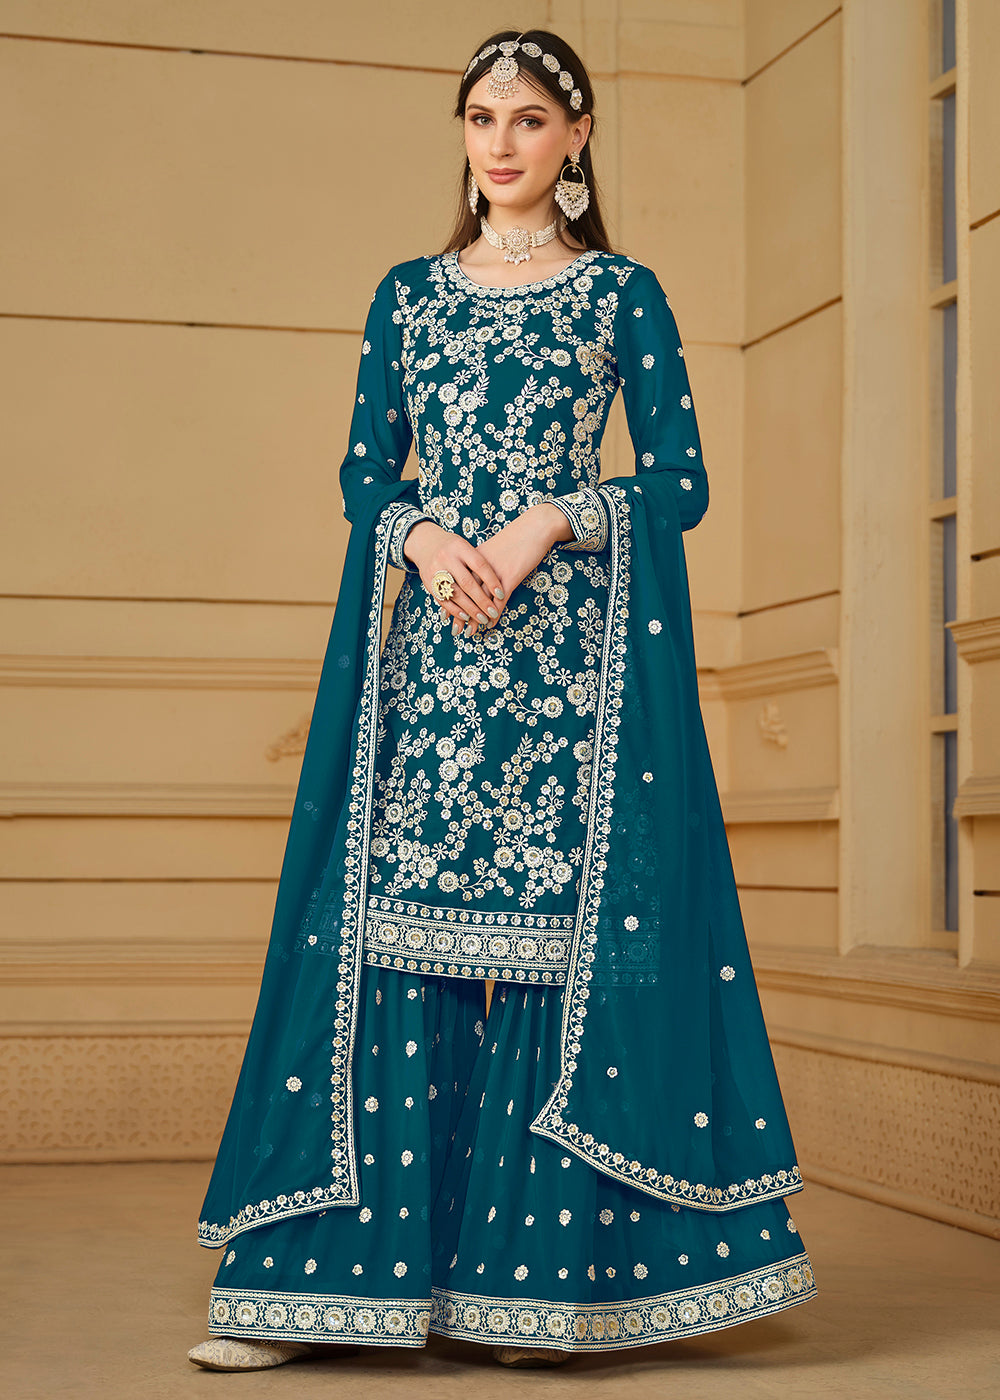 Shop Now Turquoise Blue Embroidered Georgette Gharara Style Suit Online at Empress Clothing in USA, UK, Canada, Italy & Worldwide.